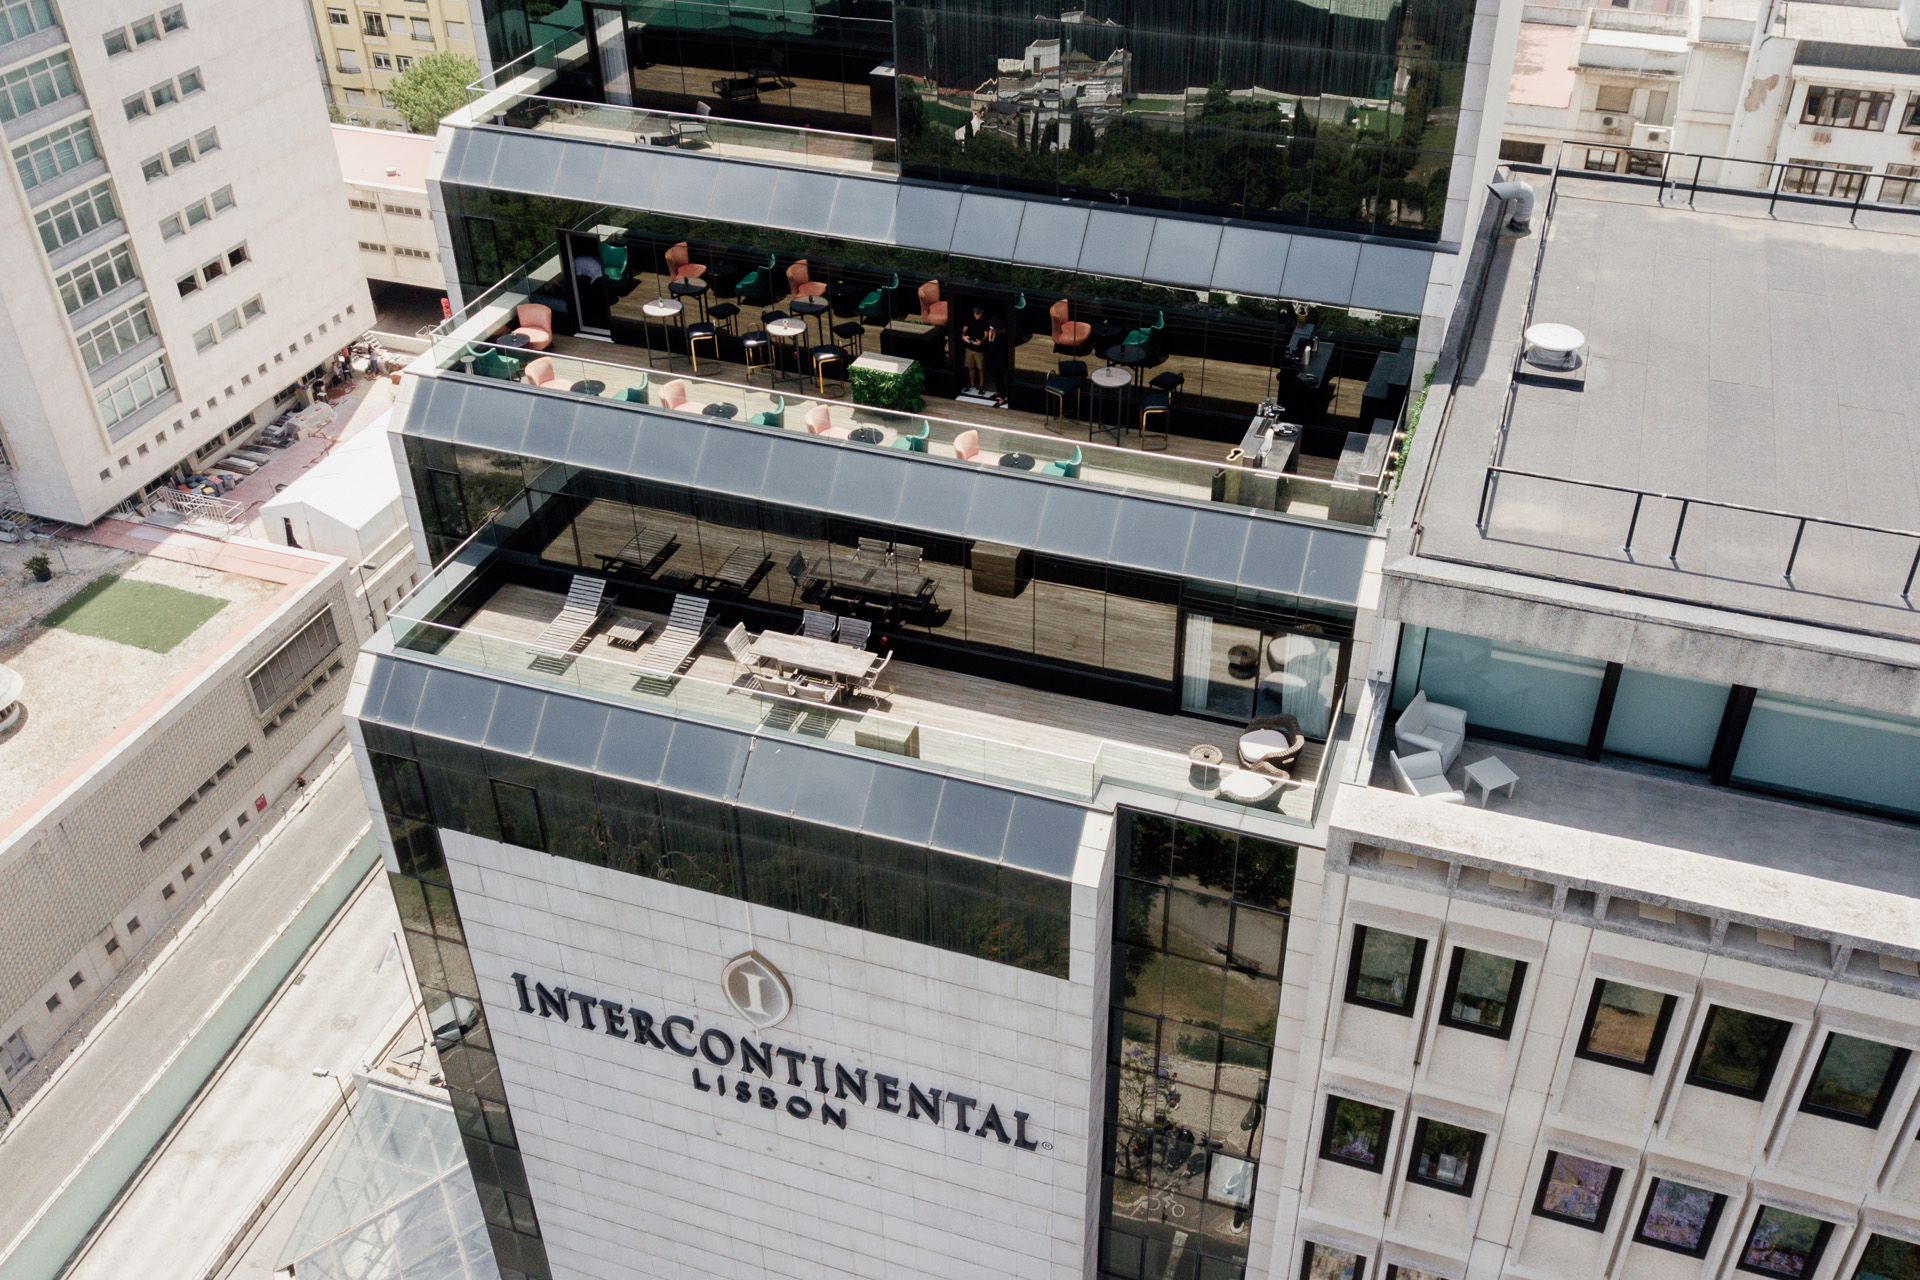 InterContinental Lisbon from above